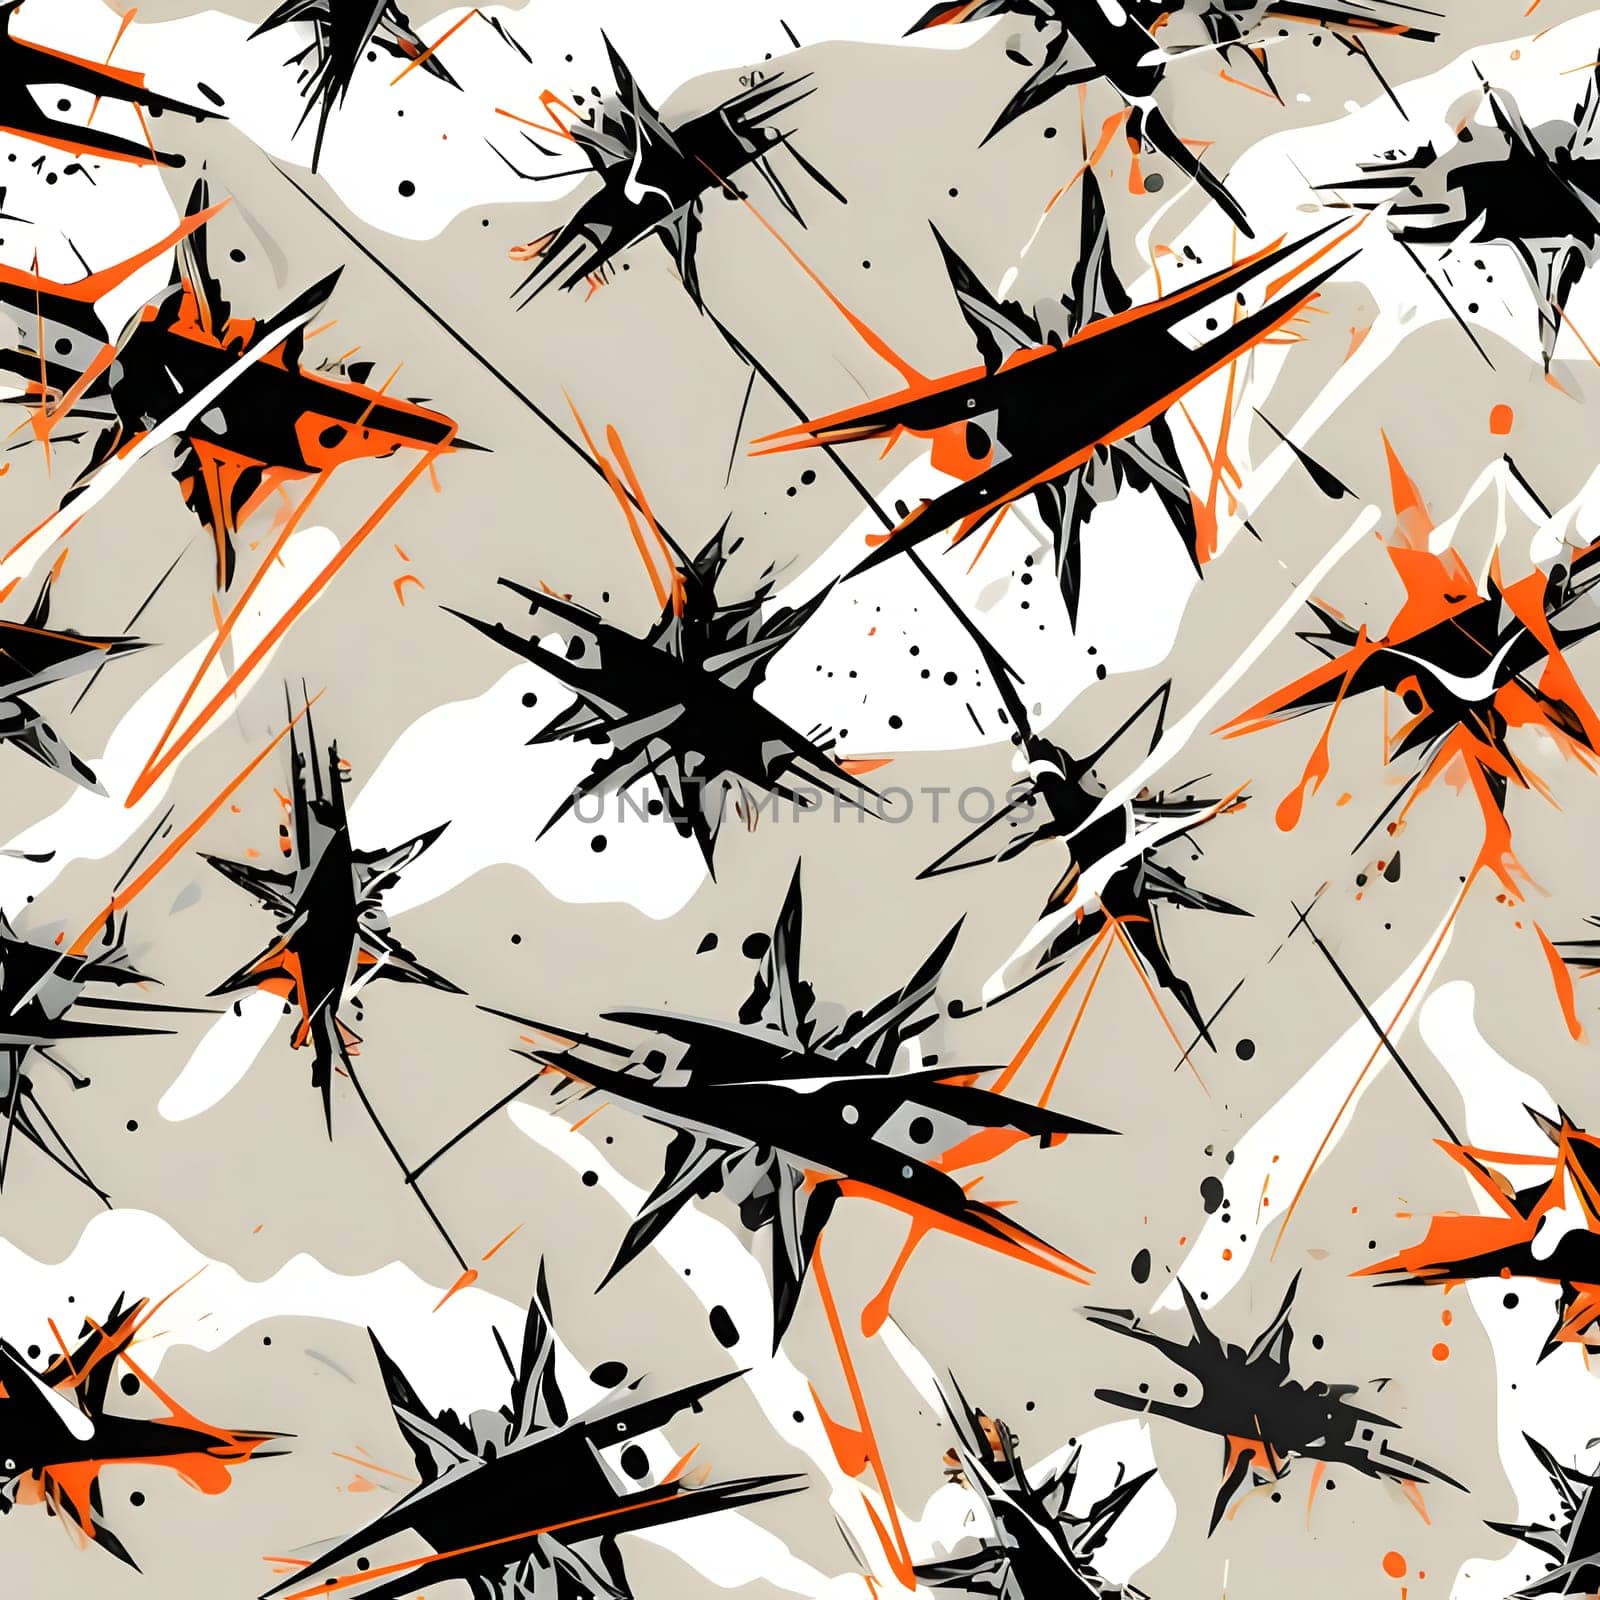 Patterns and banners backgrounds: Abstract seamless pattern with hand drawn brush strokes and splashes. Grunge background.